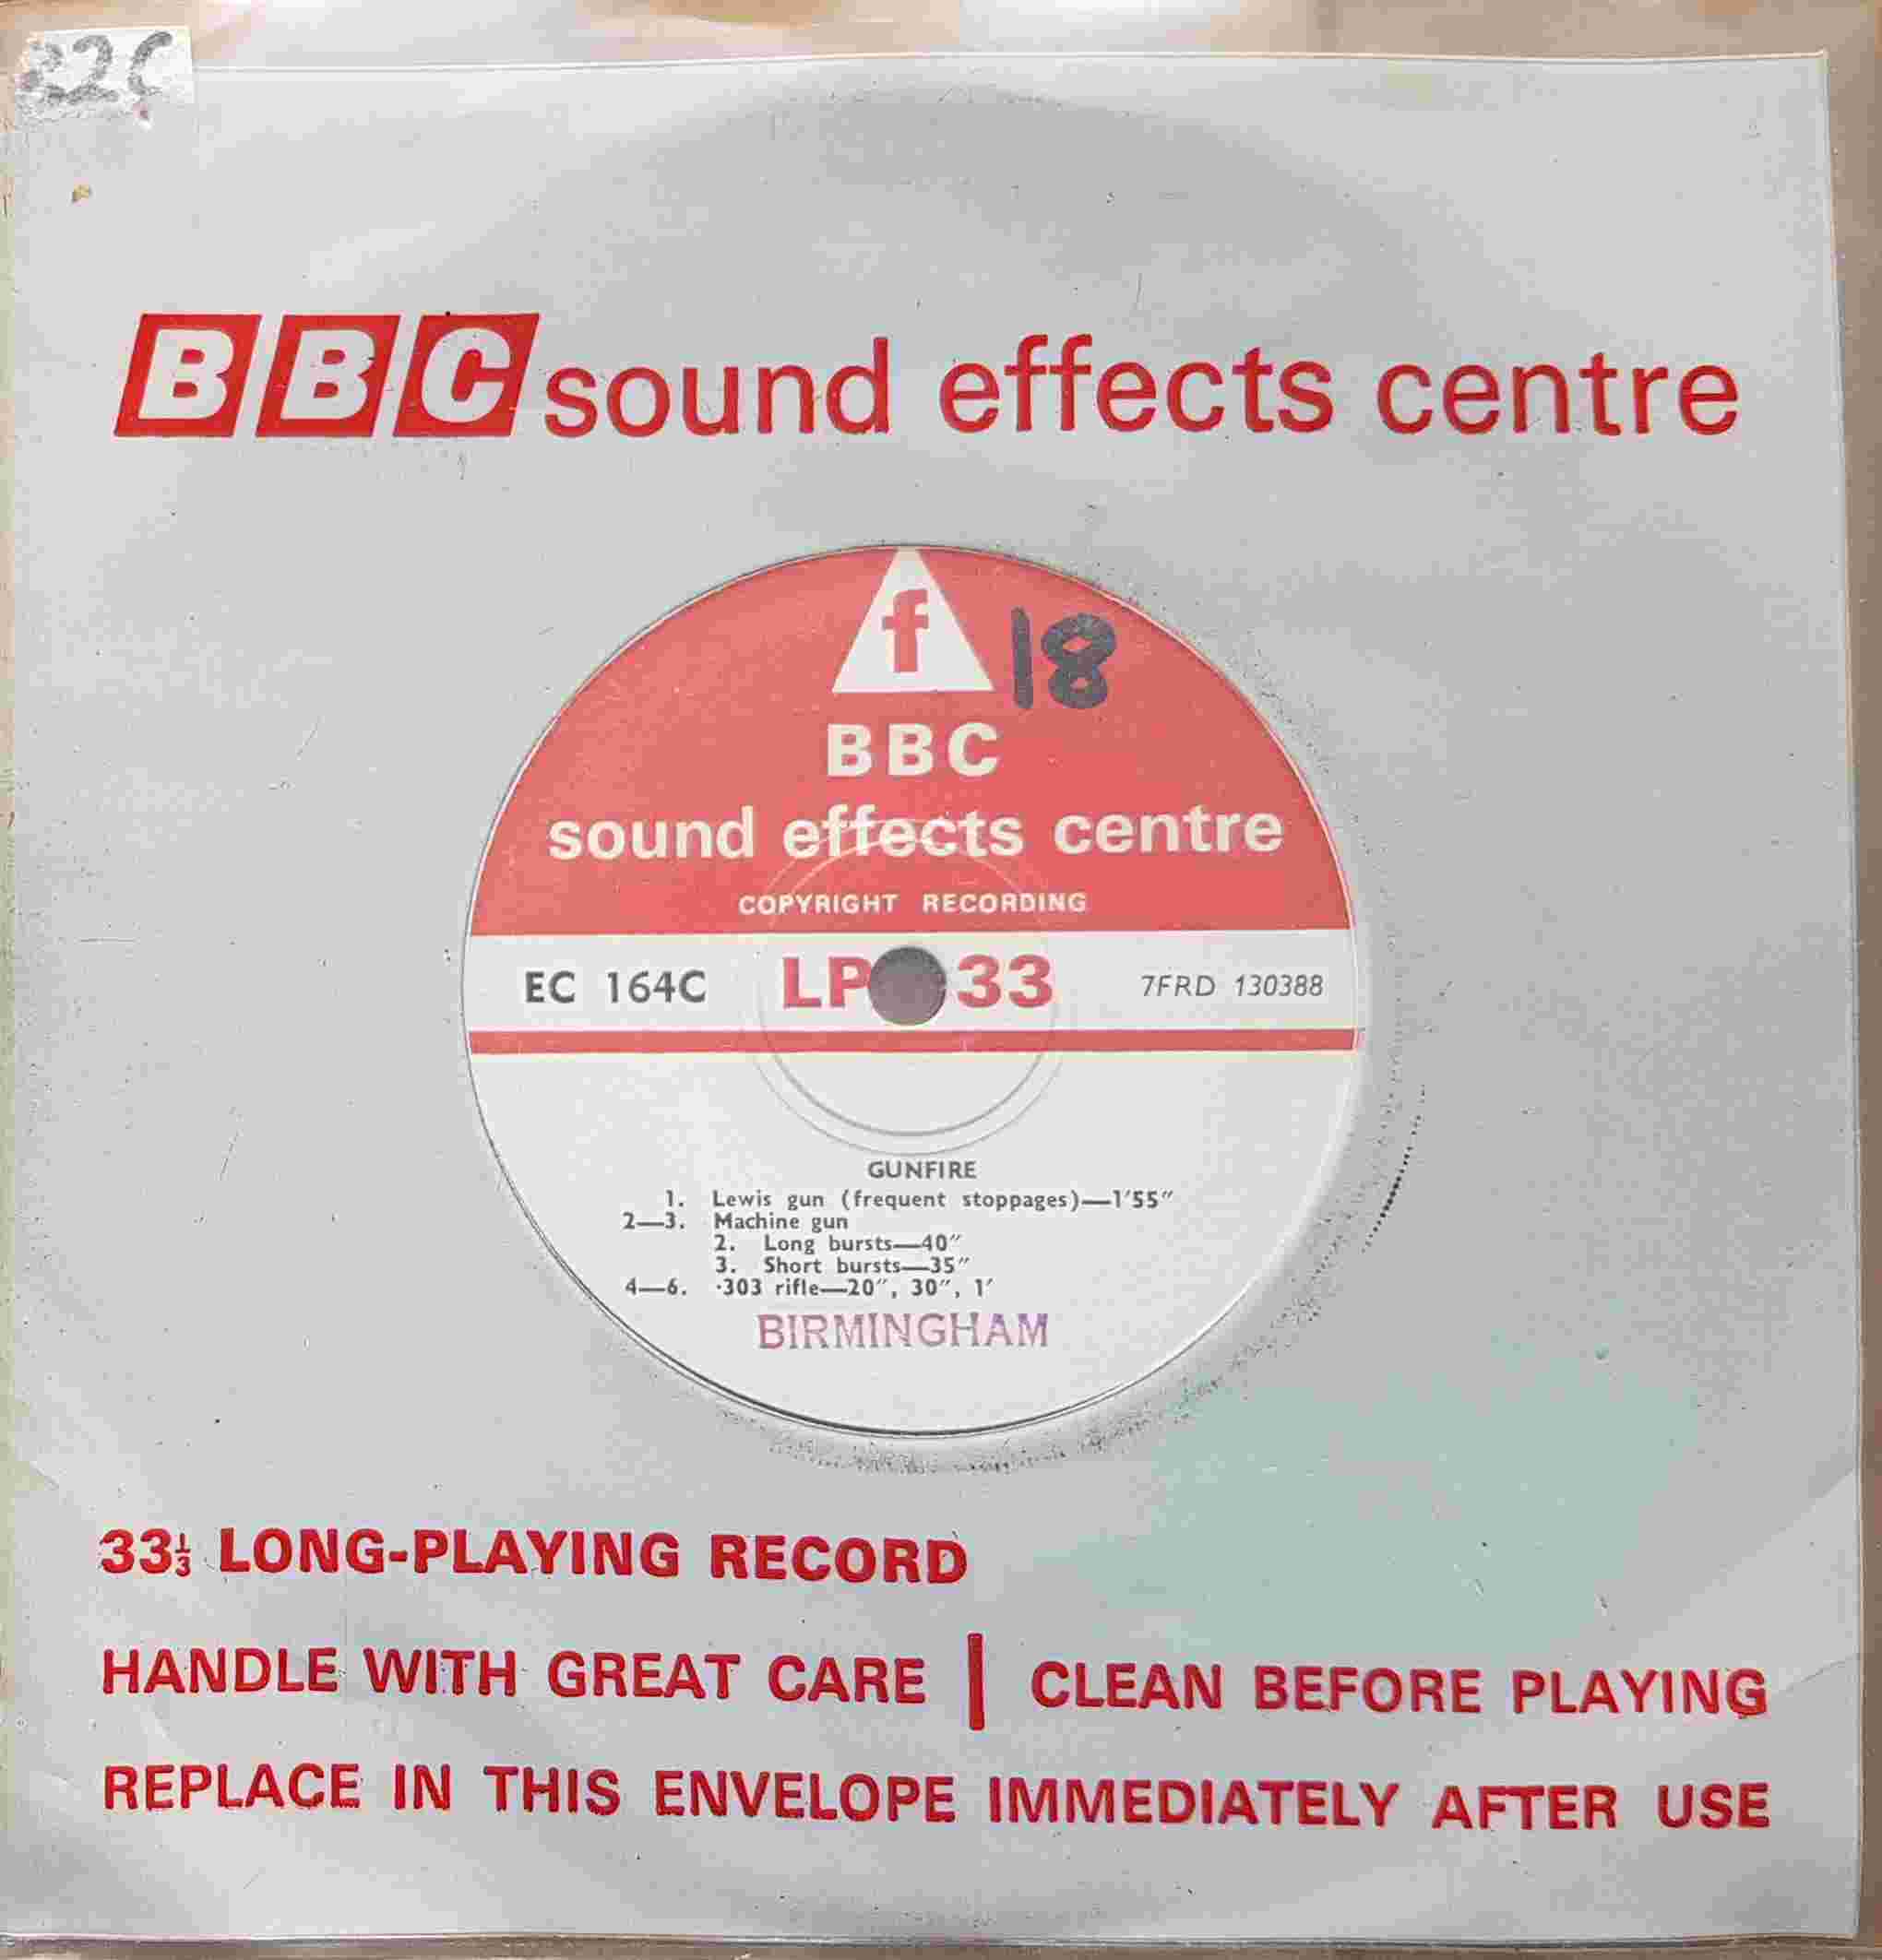 Picture of EC 164C Gunfire by artist Not registered from the BBC singles - Records and Tapes library